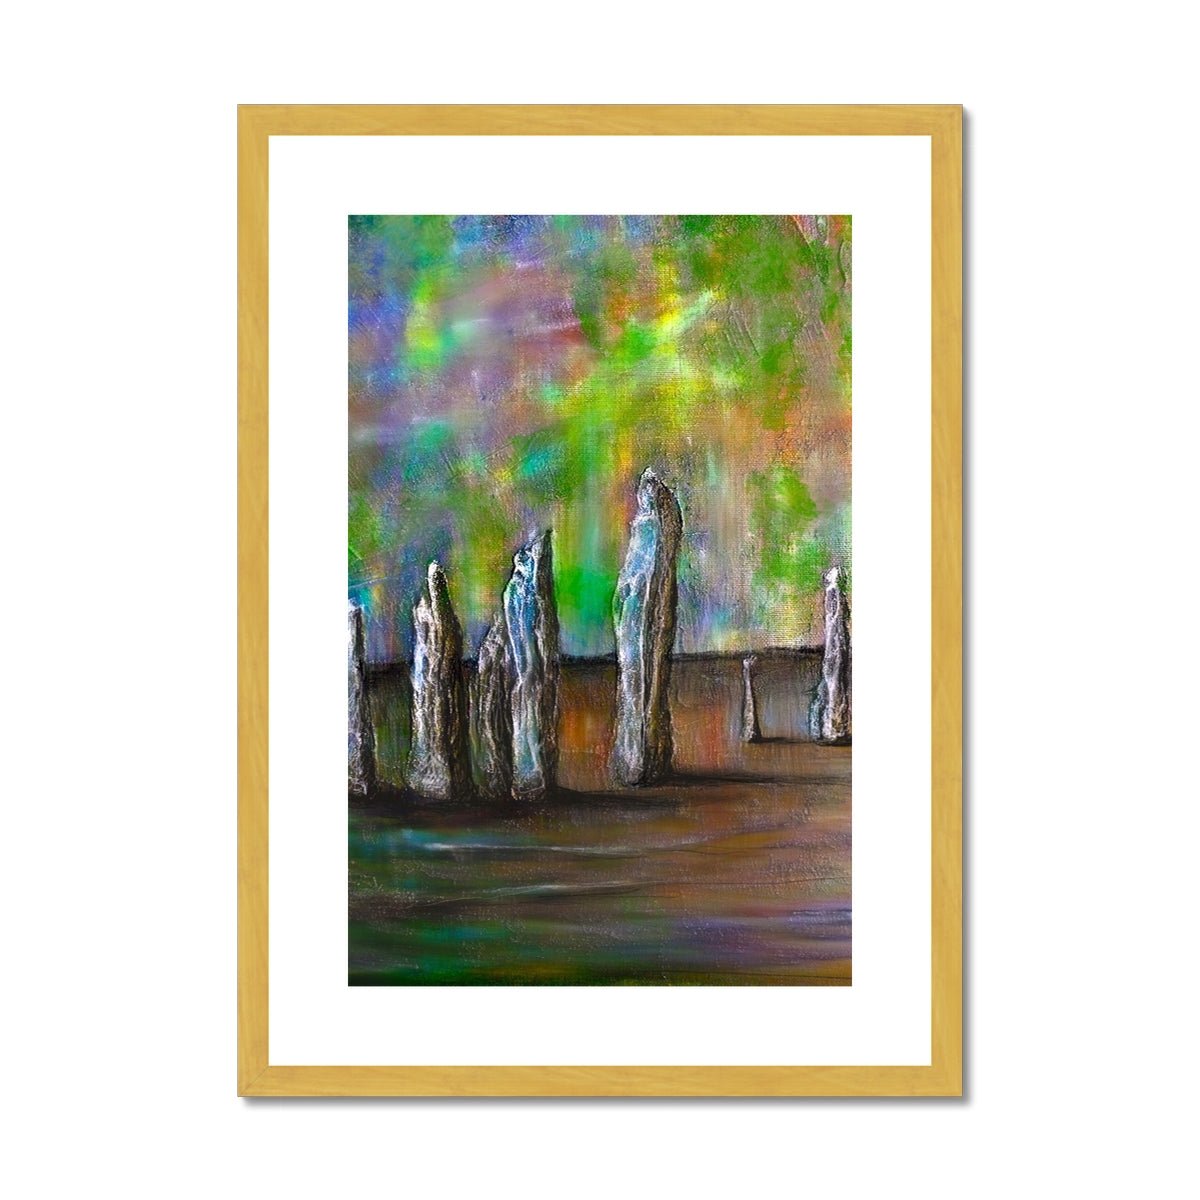 Callanish Northern Lights Lewis Painting | Antique Framed & Mounted Prints From Scotland-Antique Framed & Mounted Prints-Hebridean Islands Art Gallery-A2 Portrait-Gold Frame-Paintings, Prints, Homeware, Art Gifts From Scotland By Scottish Artist Kevin Hunter